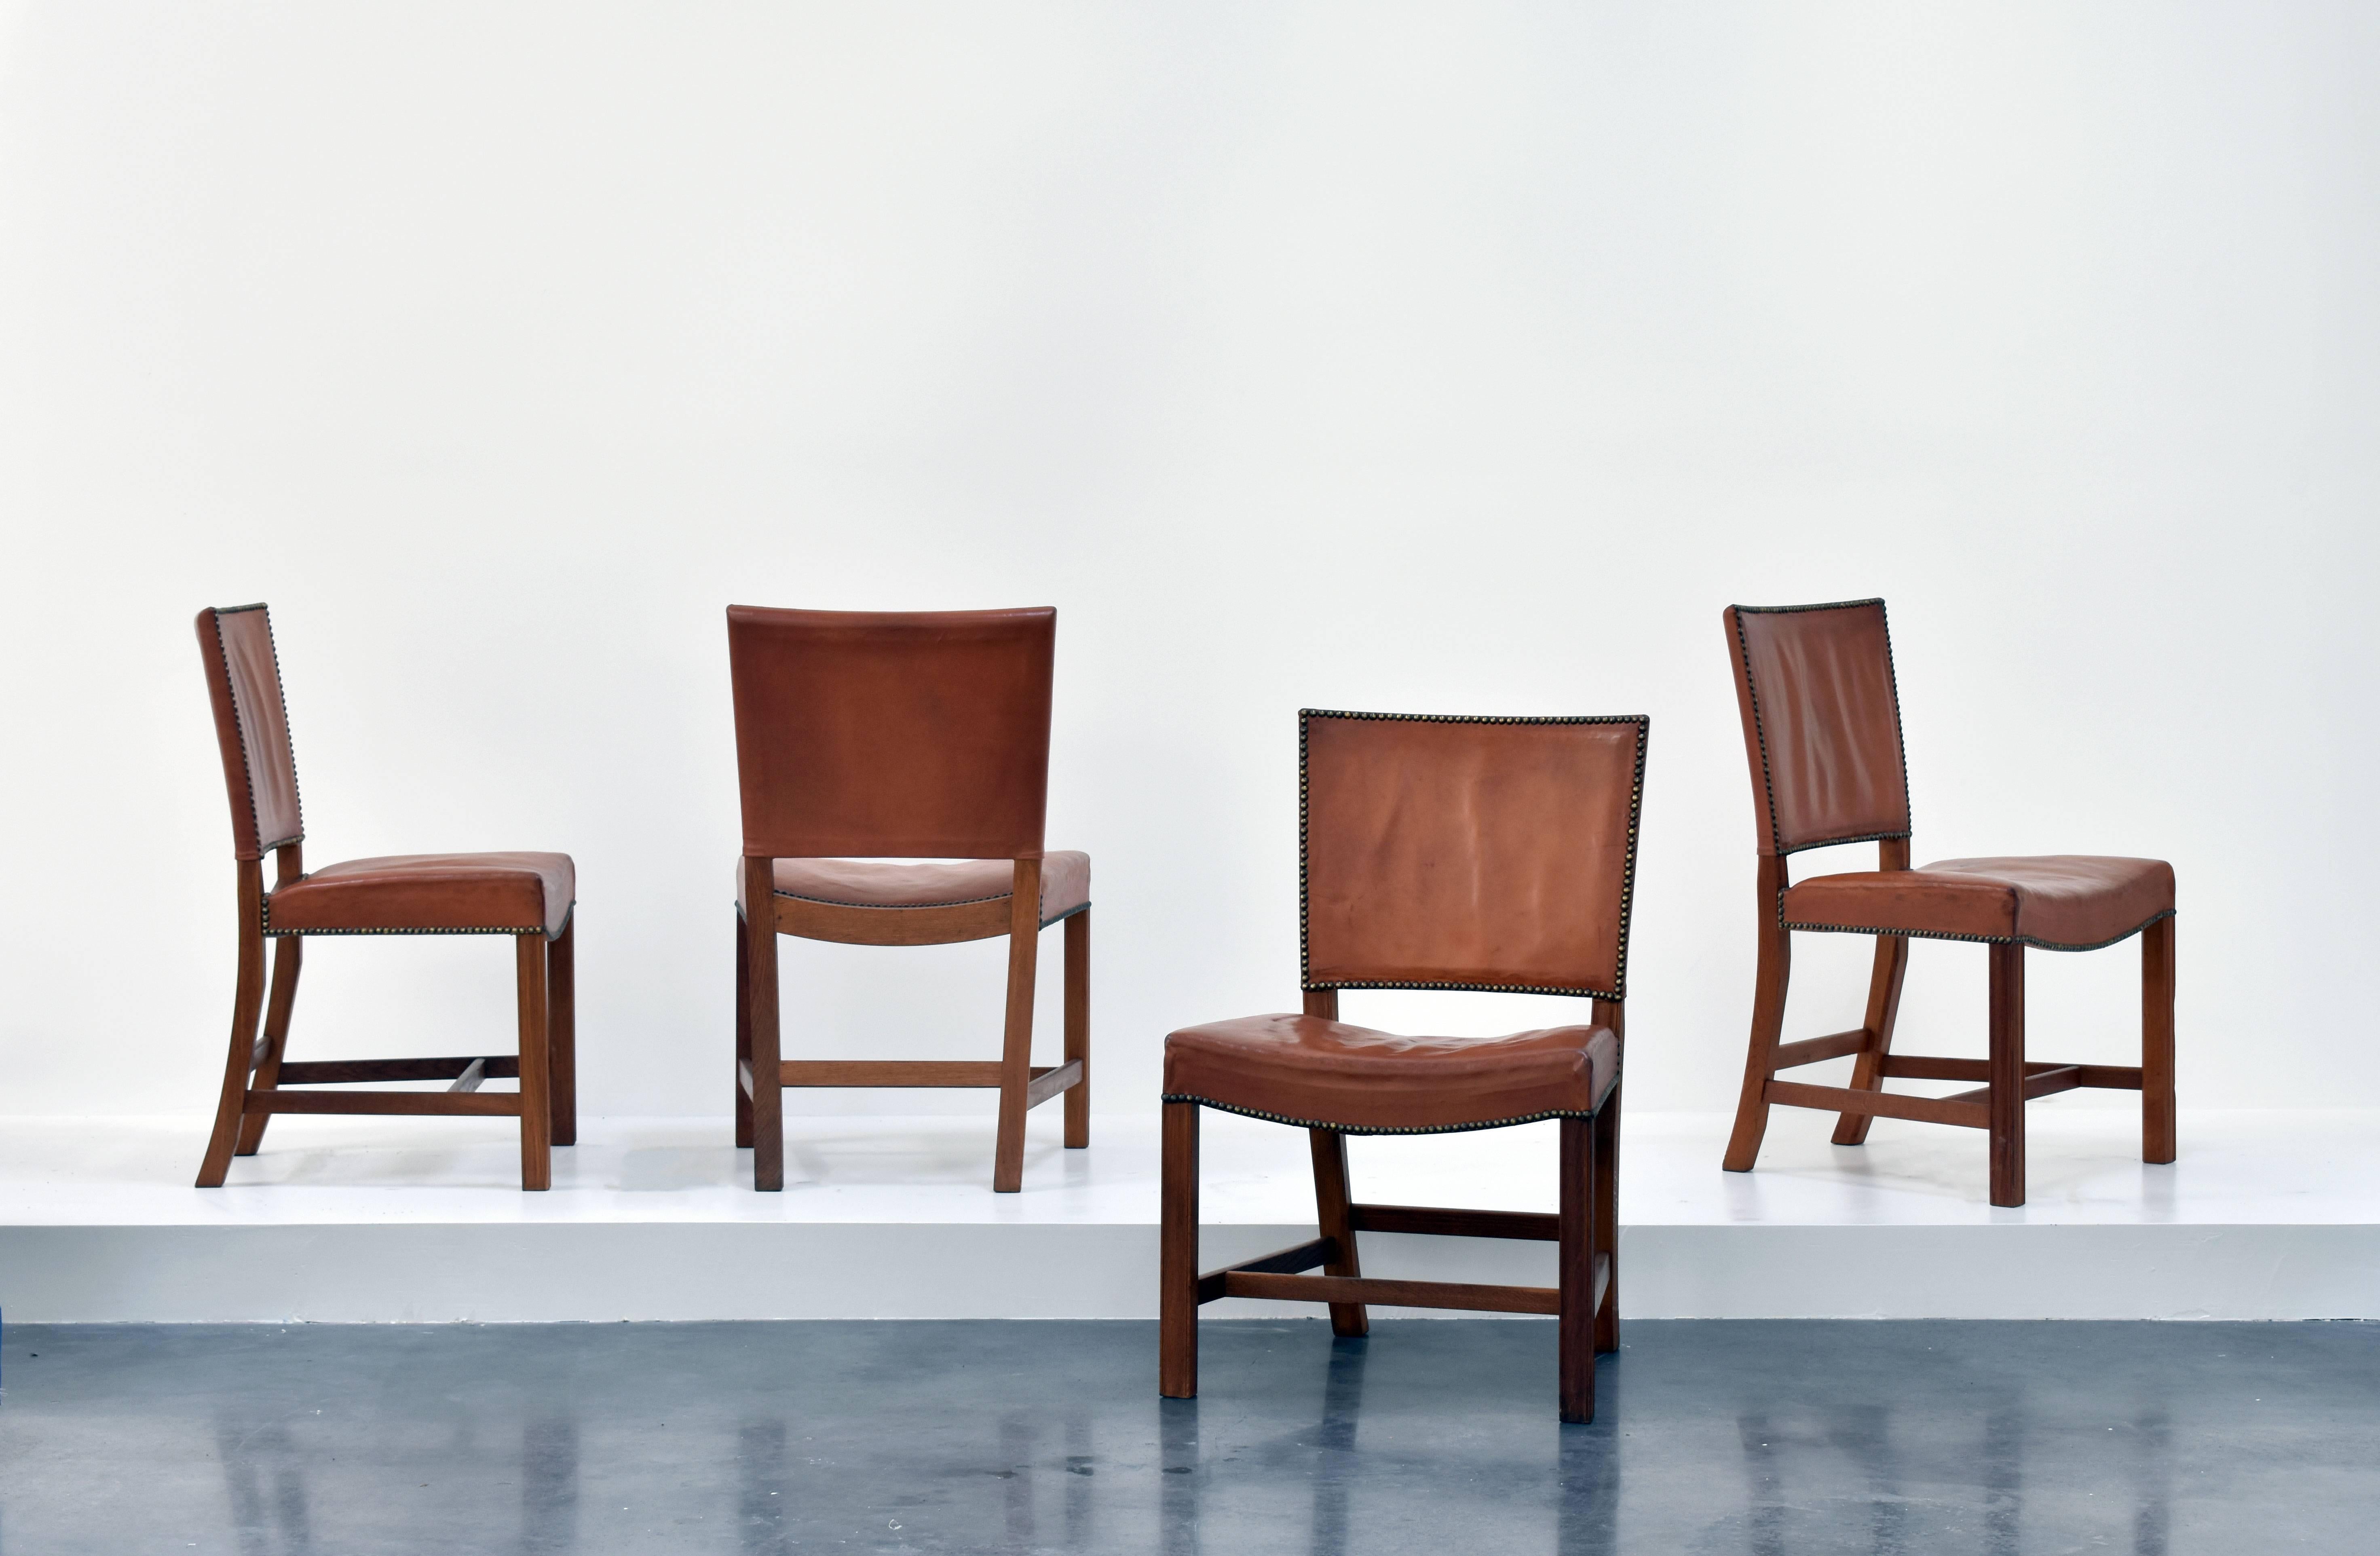 A set of four niger leather dining chairs designed by Kaare Klint in 1927 for the lecture hall of the new Danish Museum of Art and Design, and exhibited at the Danish Pavilion at the 1929 Barcelona International Exposition.

The Barcelona chair